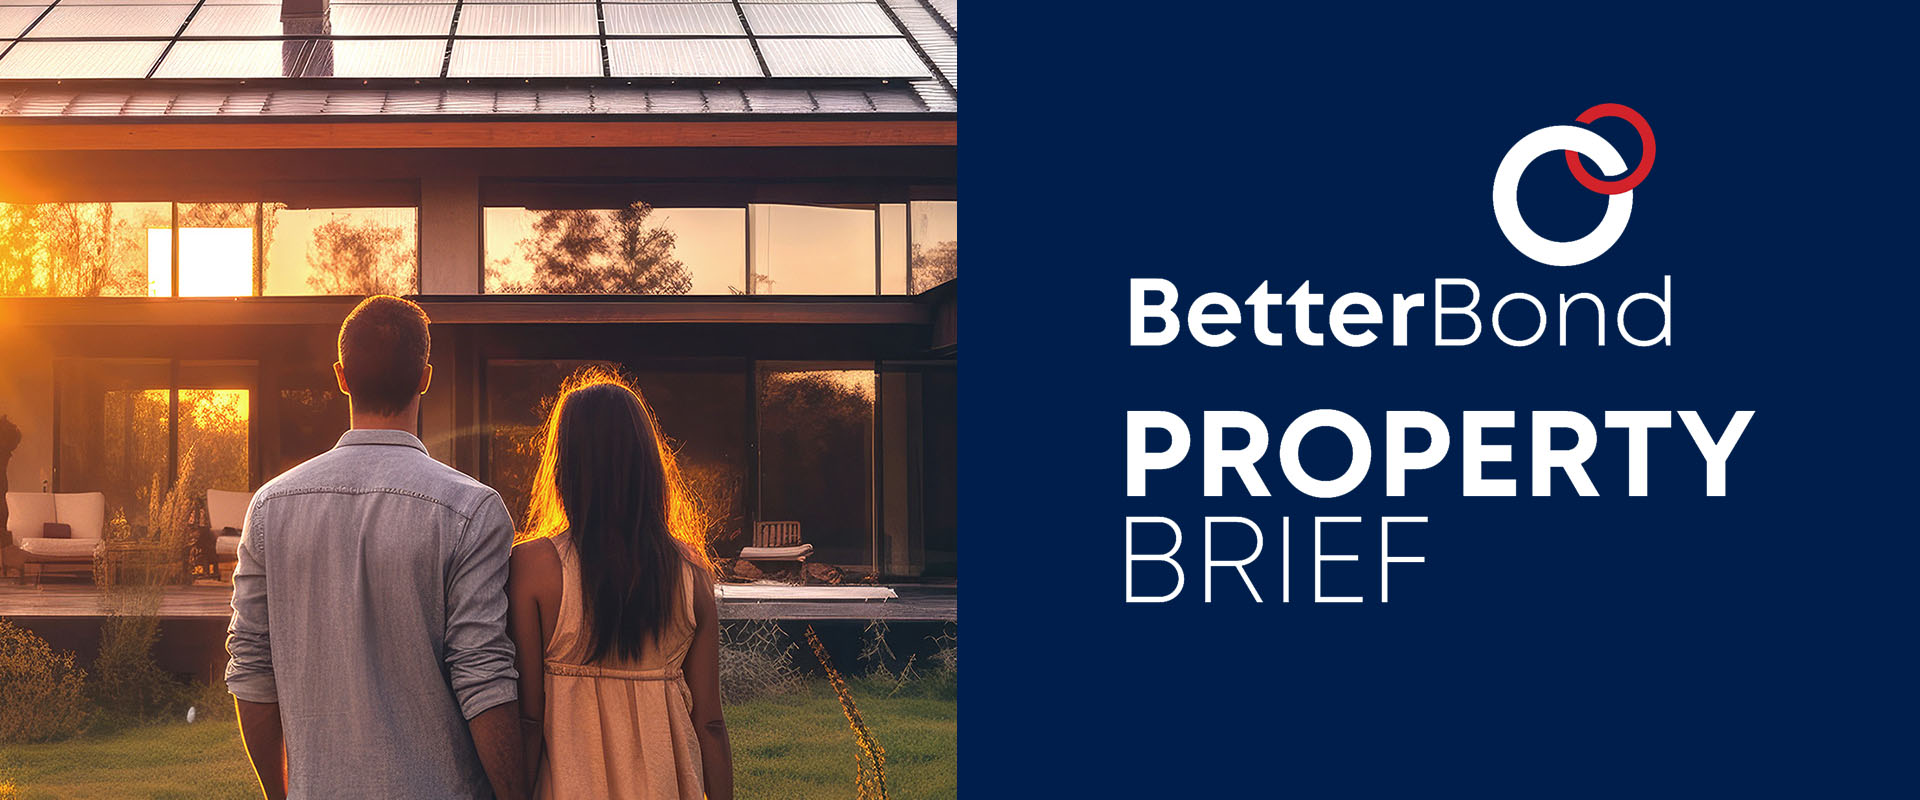 BetterBond Property Brief – it’s tough out there, but with glimmers of hope